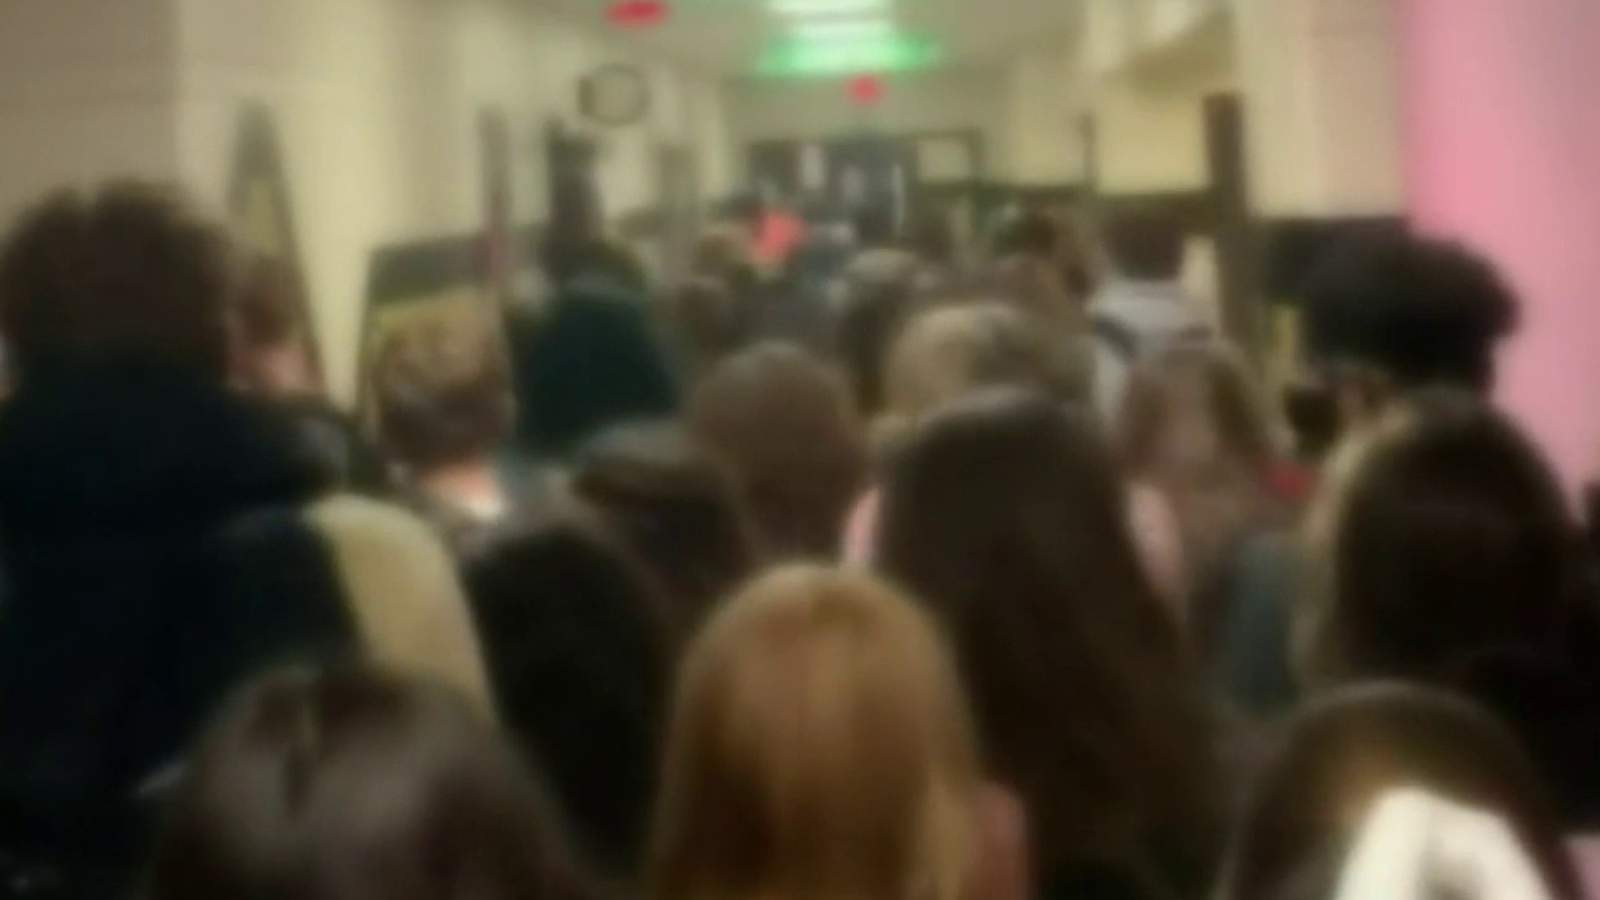 Video of crowded hallways inside Macomb County based school district creates concern